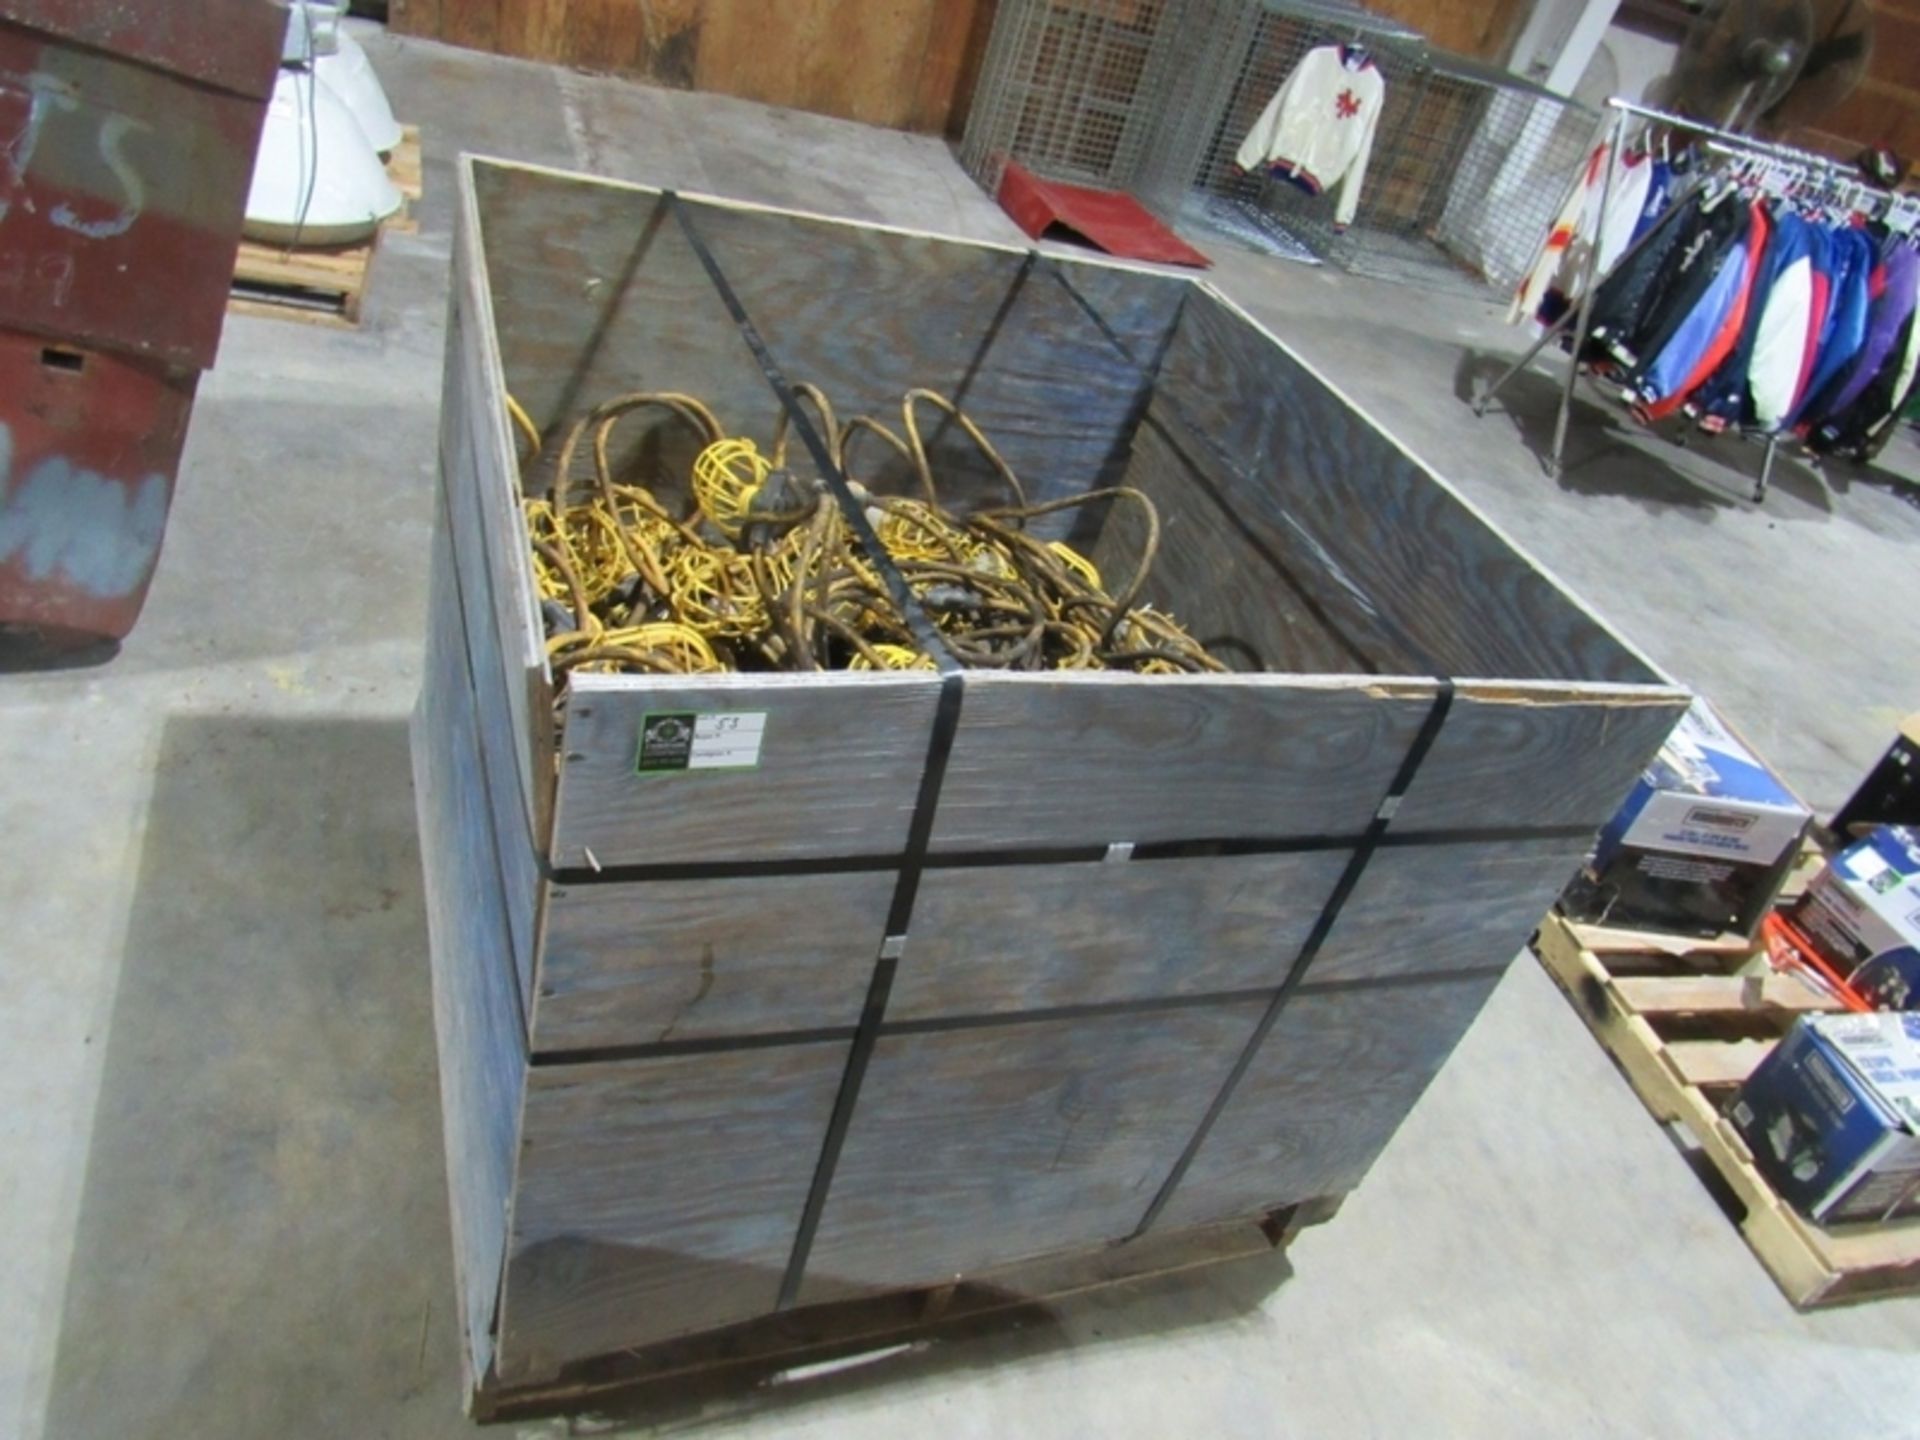 Crate of Temporary Construction Lights- ***Located in Chattanooga, TN*** Crate - 4' x 4' x 44" (